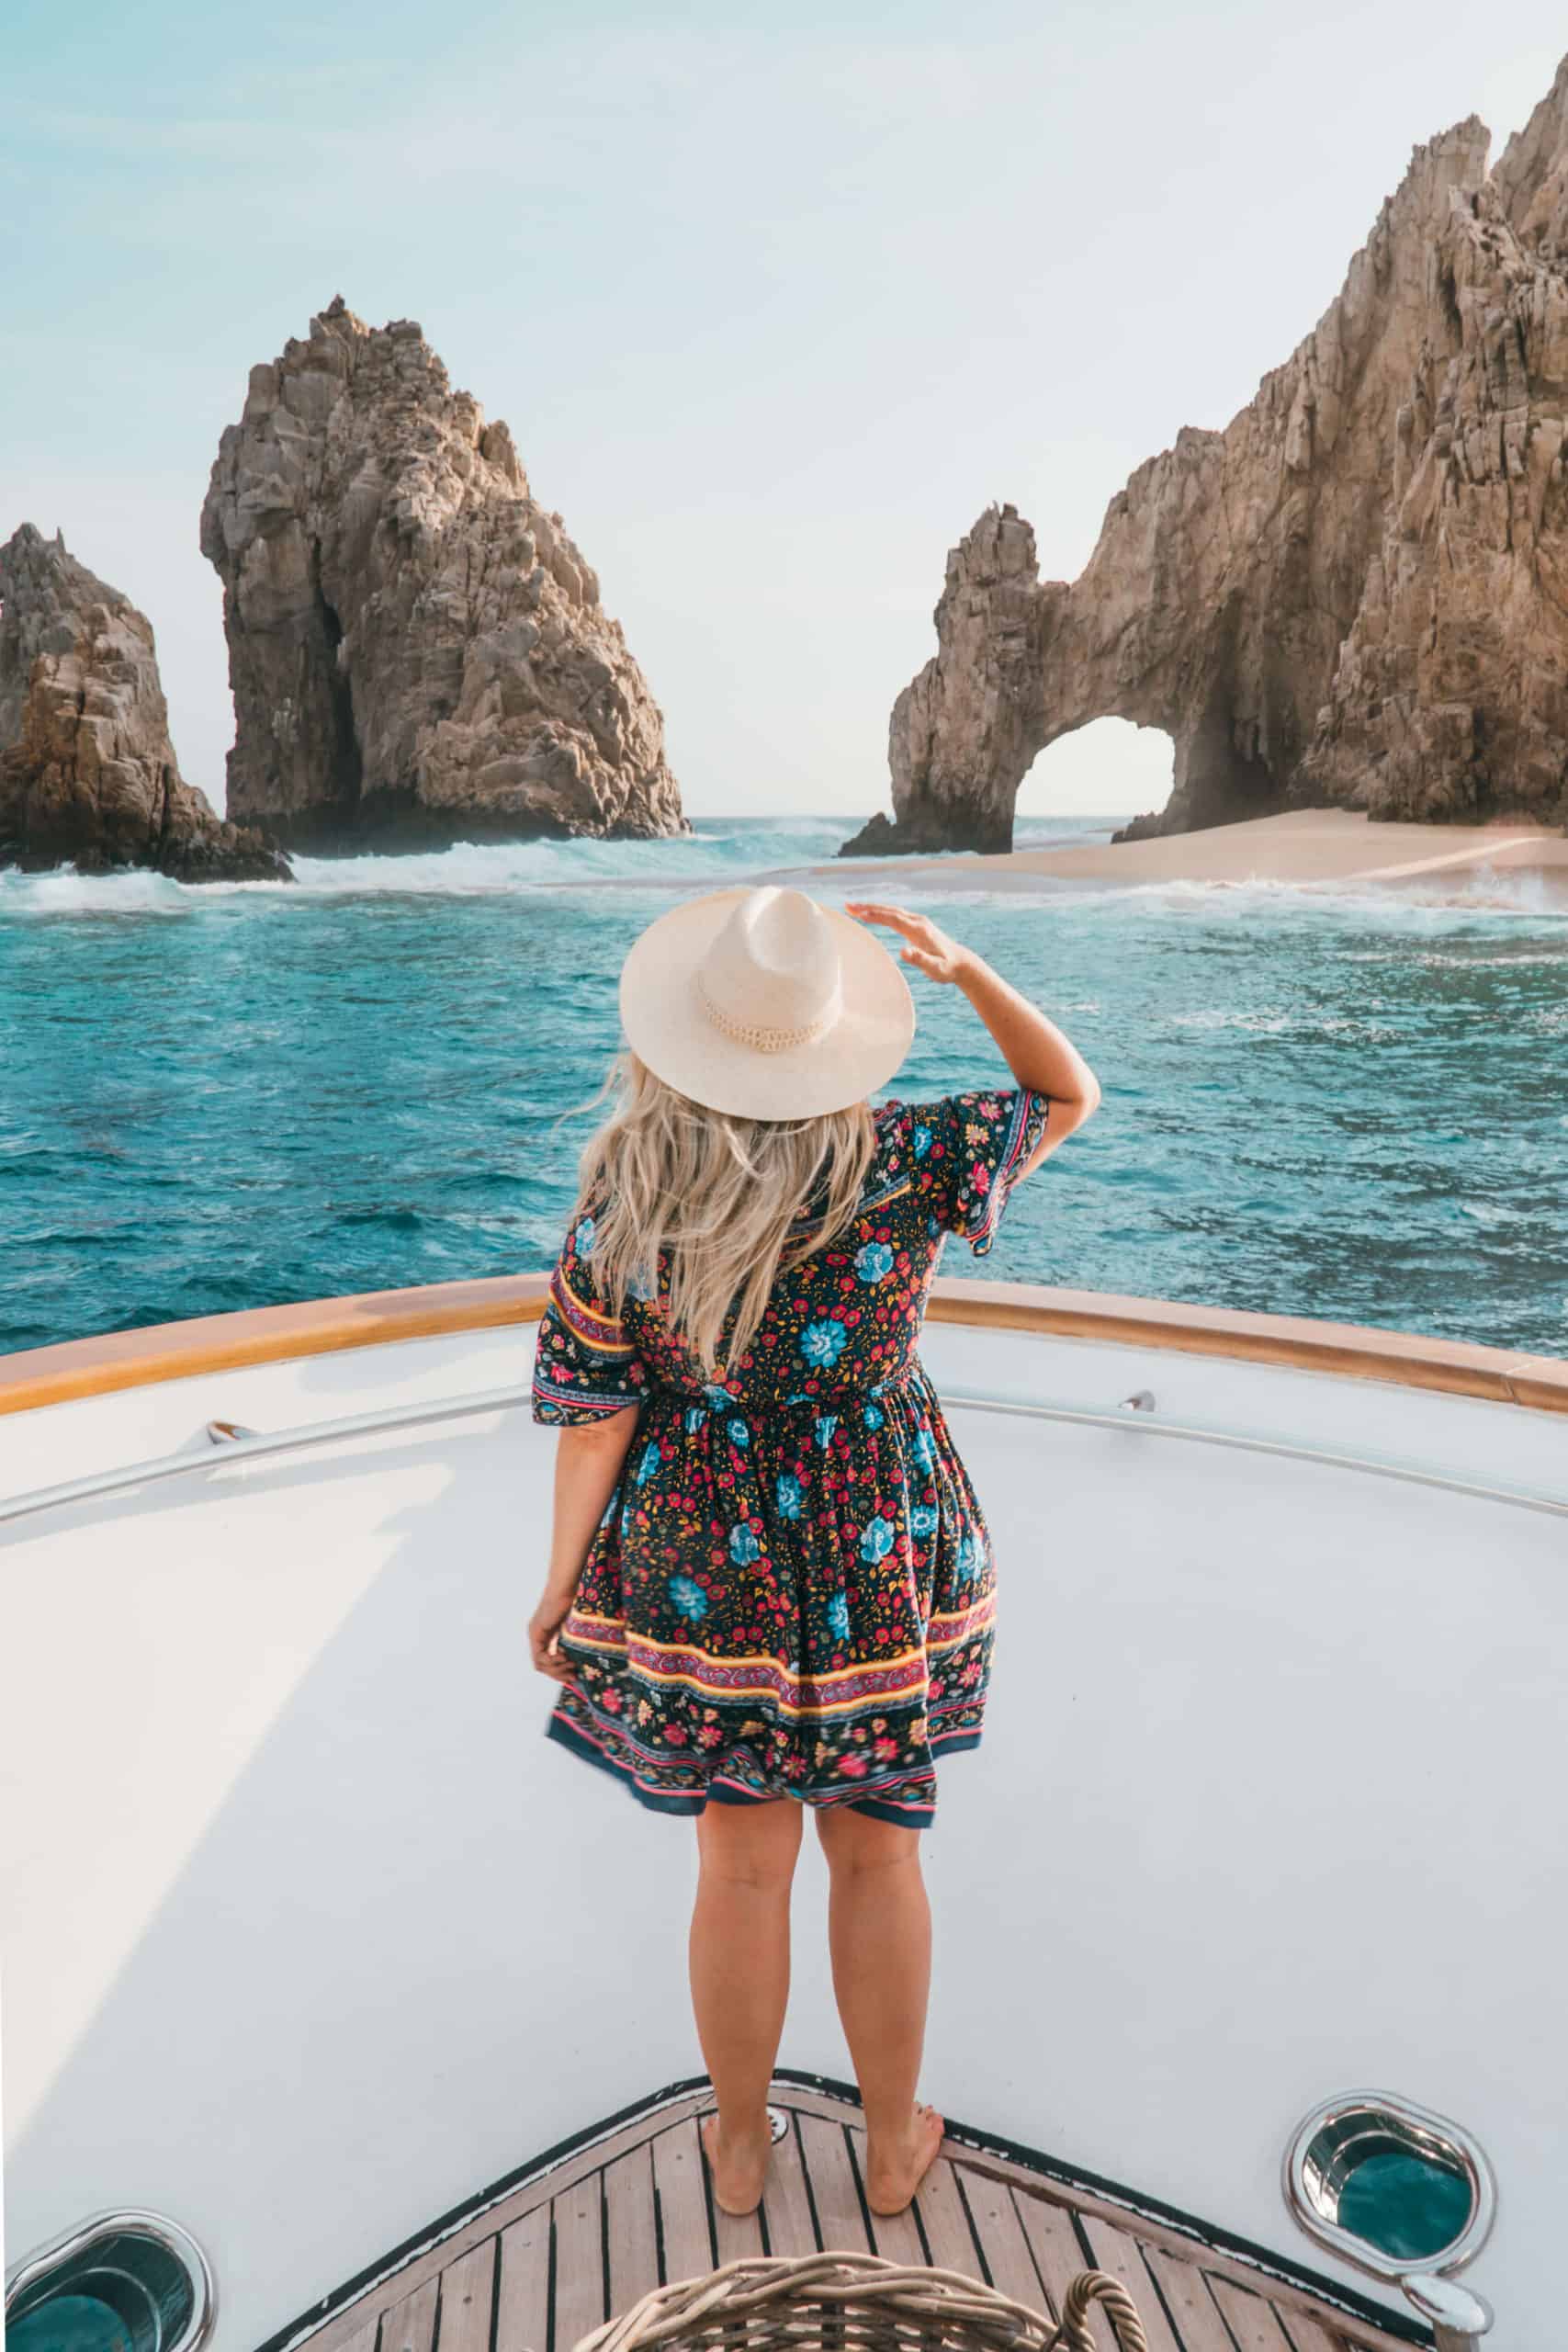 Short Print Dress | Where to Find the Best Travel Dresses - My Favorite Travel Style and Outfits | The Republic of Rose